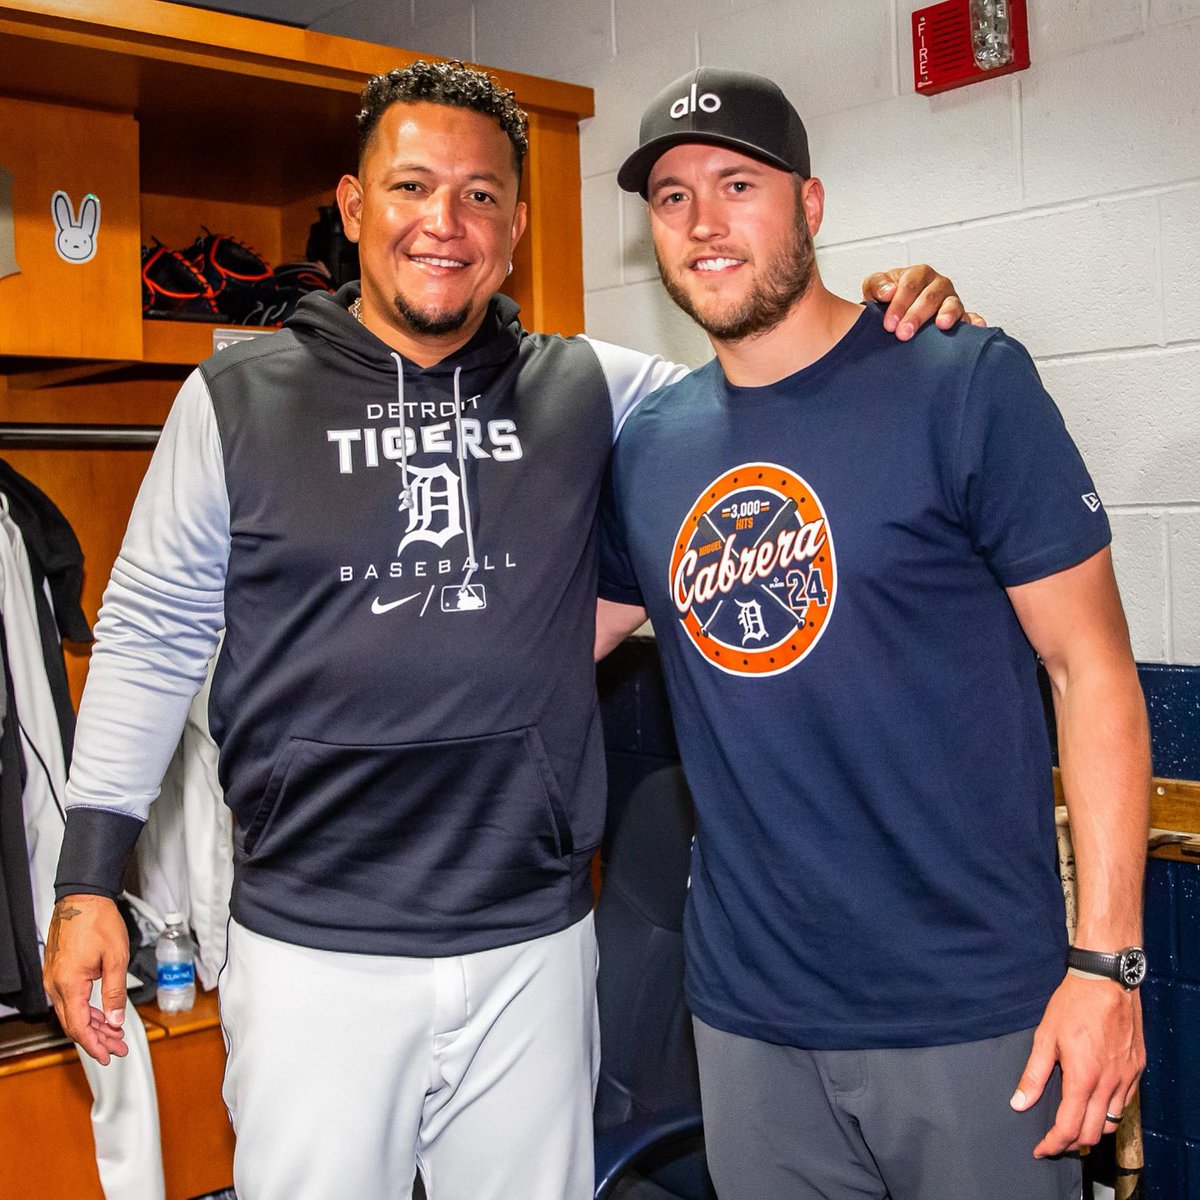 Detroit Tigers on X: Pictured: Miggy and a fan.